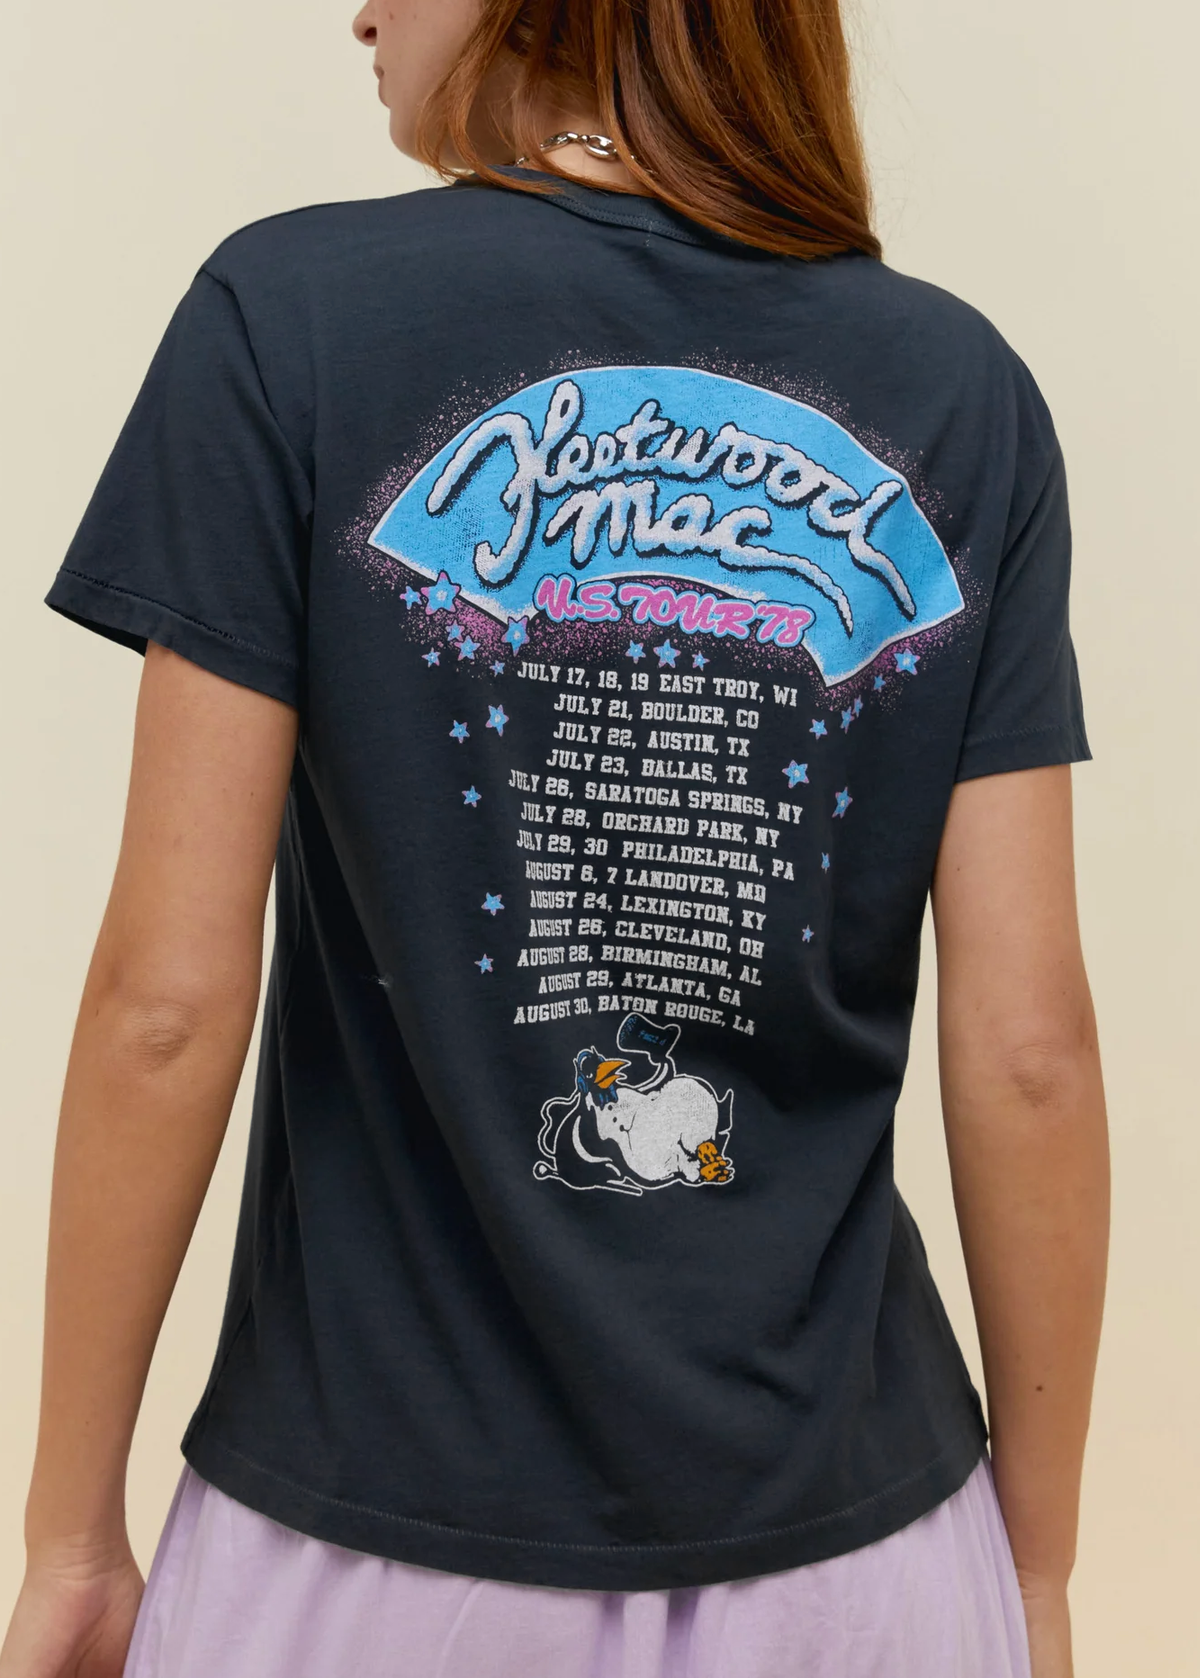 Black Fleetwood Mac Penguins US Tour '78 tee by daydreamer la, officially licensed and made in california